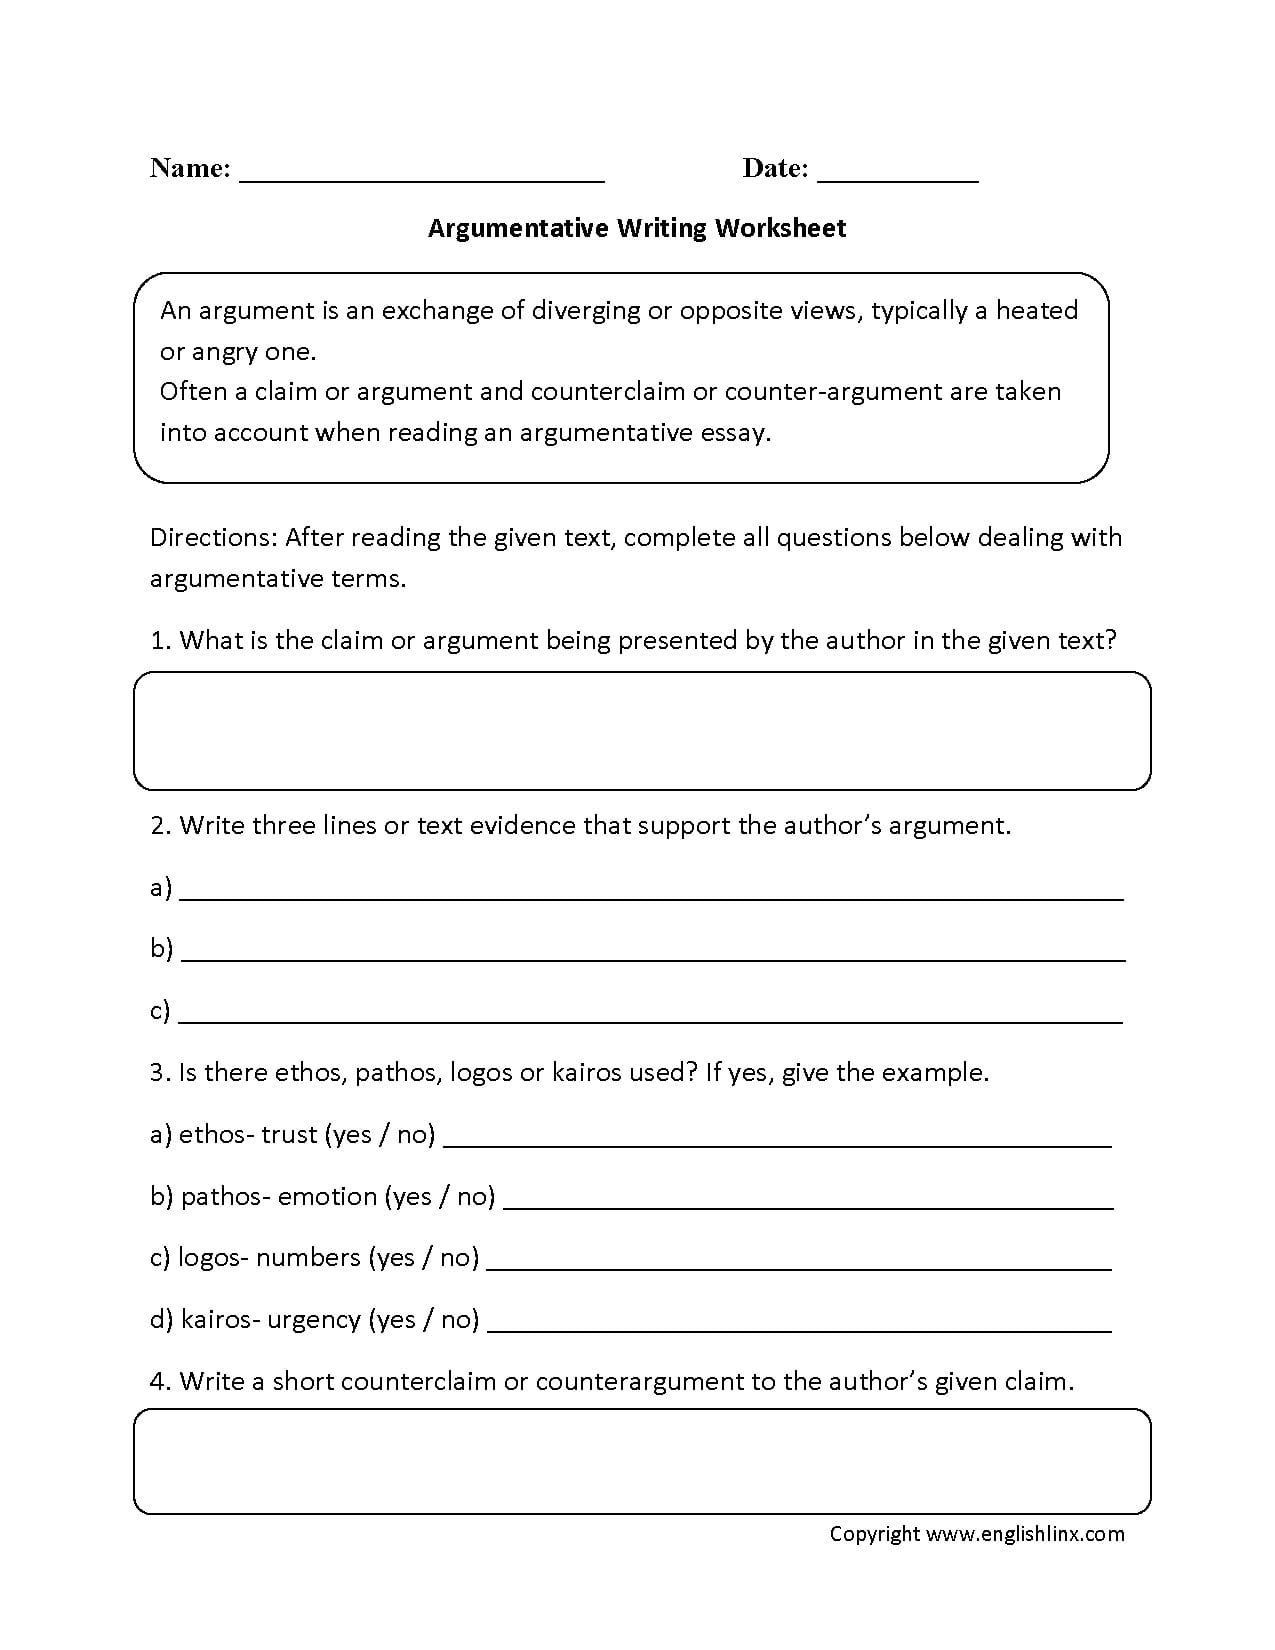 016 Argumentative Writing Worksheet Essay Example How To